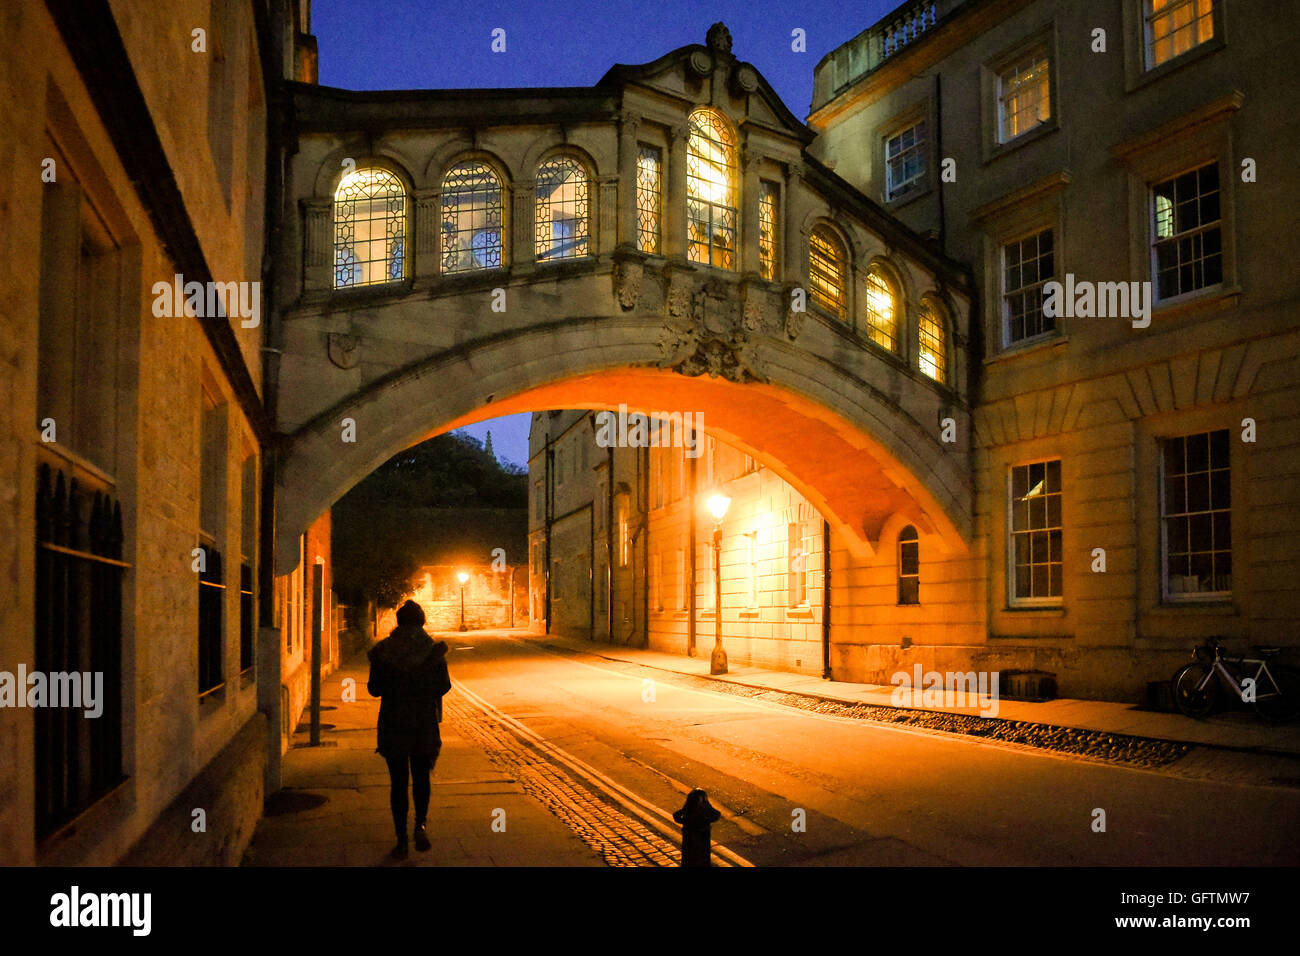 The Bridge of Sighs in Oxford, UK otherwise known as Hertford Bridge. Stock Photo